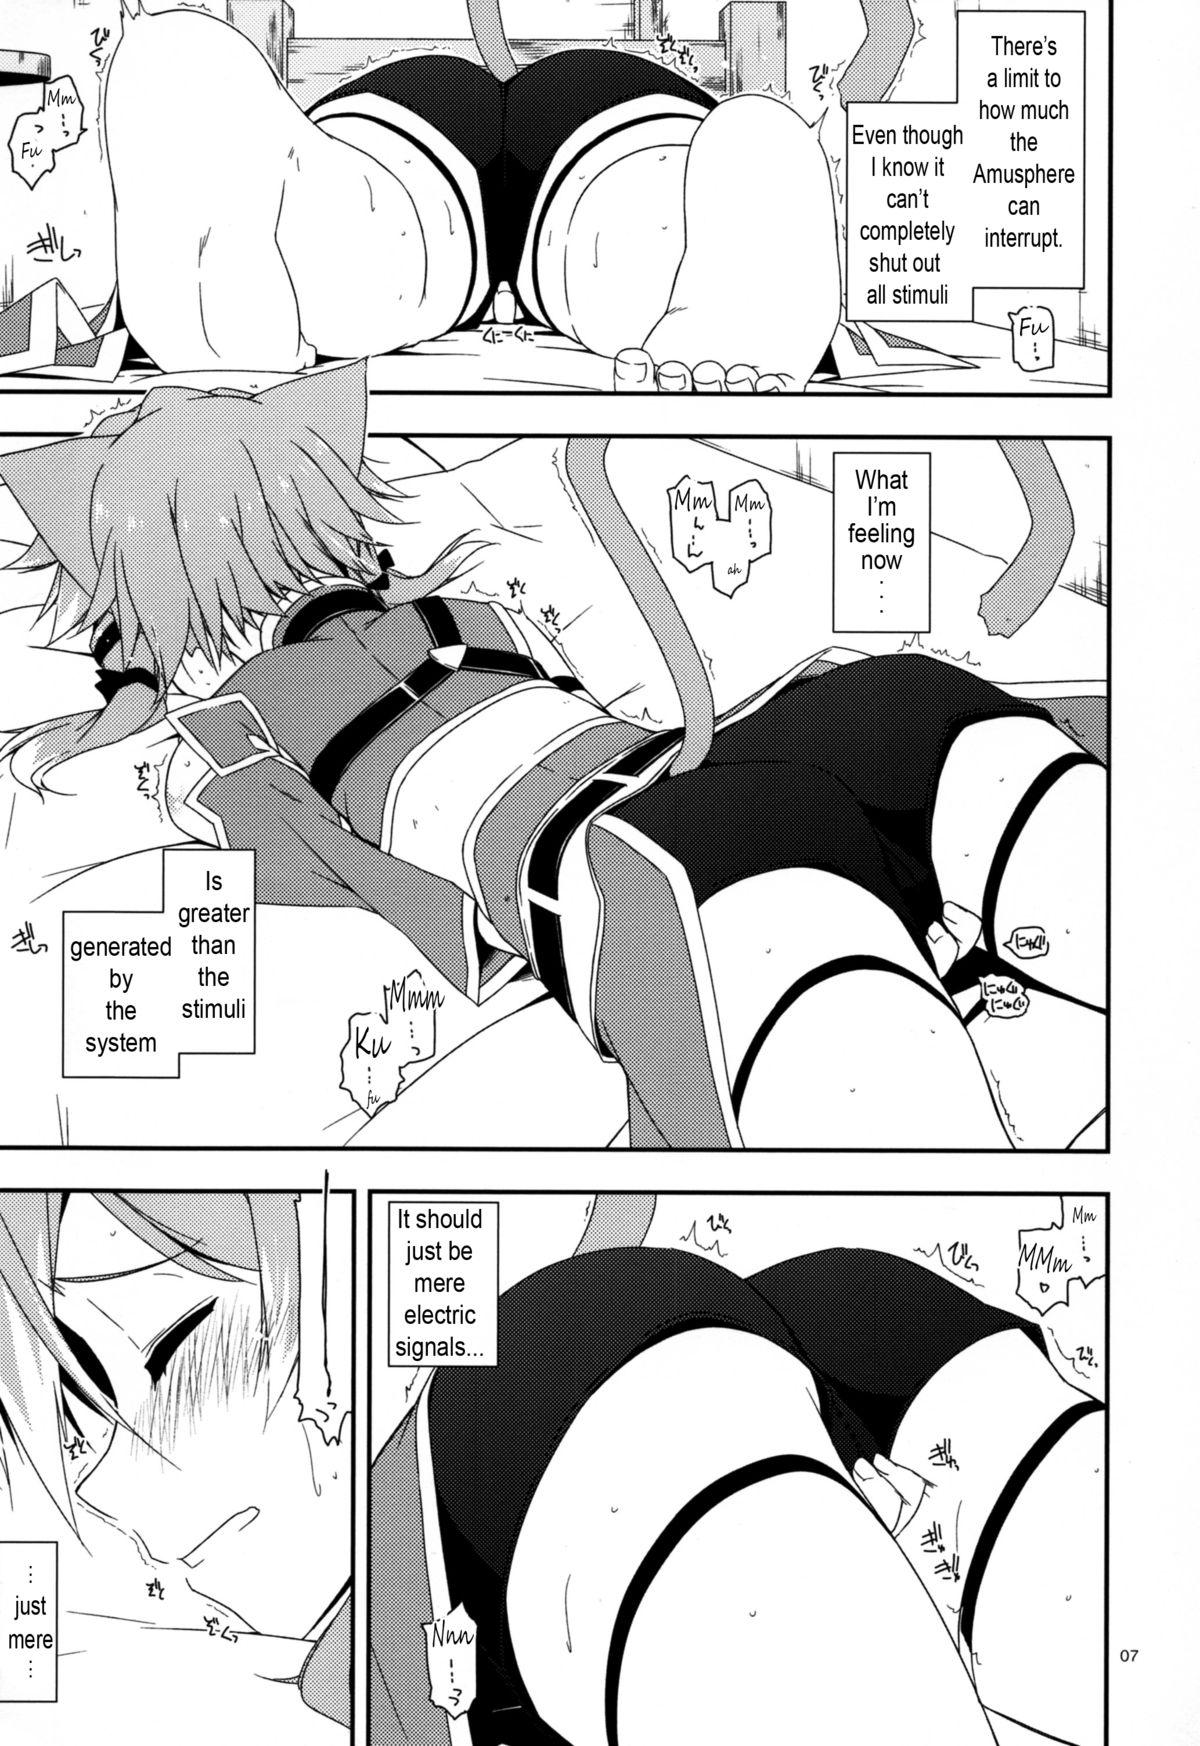 Hooker Difference - Sword art online Small Tits Porn - Page 7